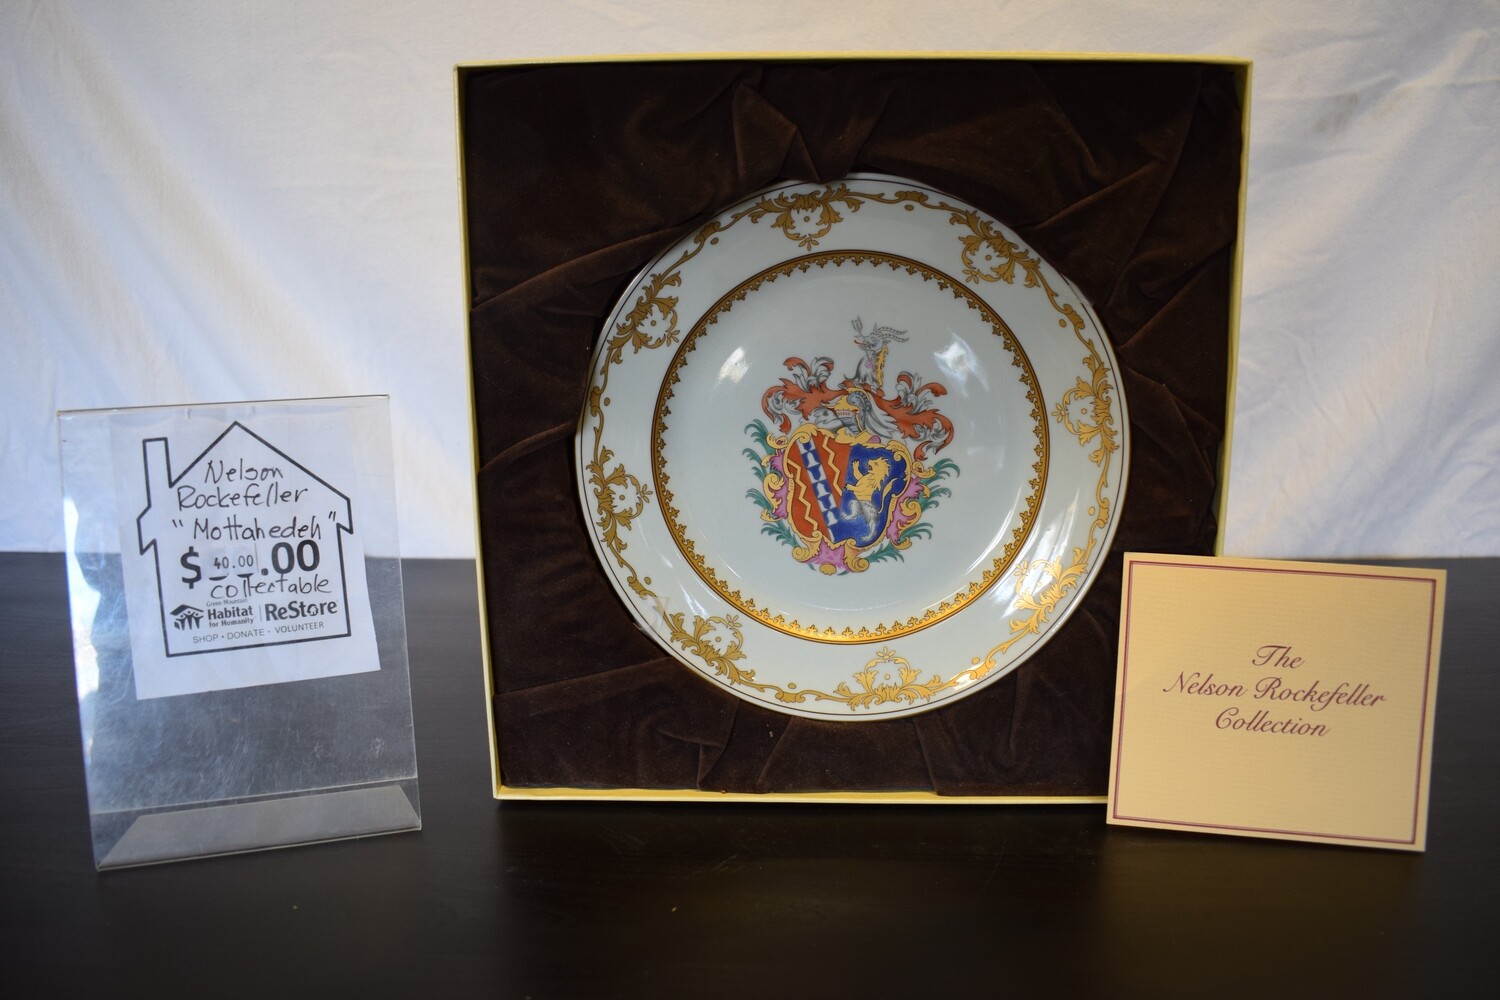 Nelson Rockefeller "Mottahedeh" Collectible Plate